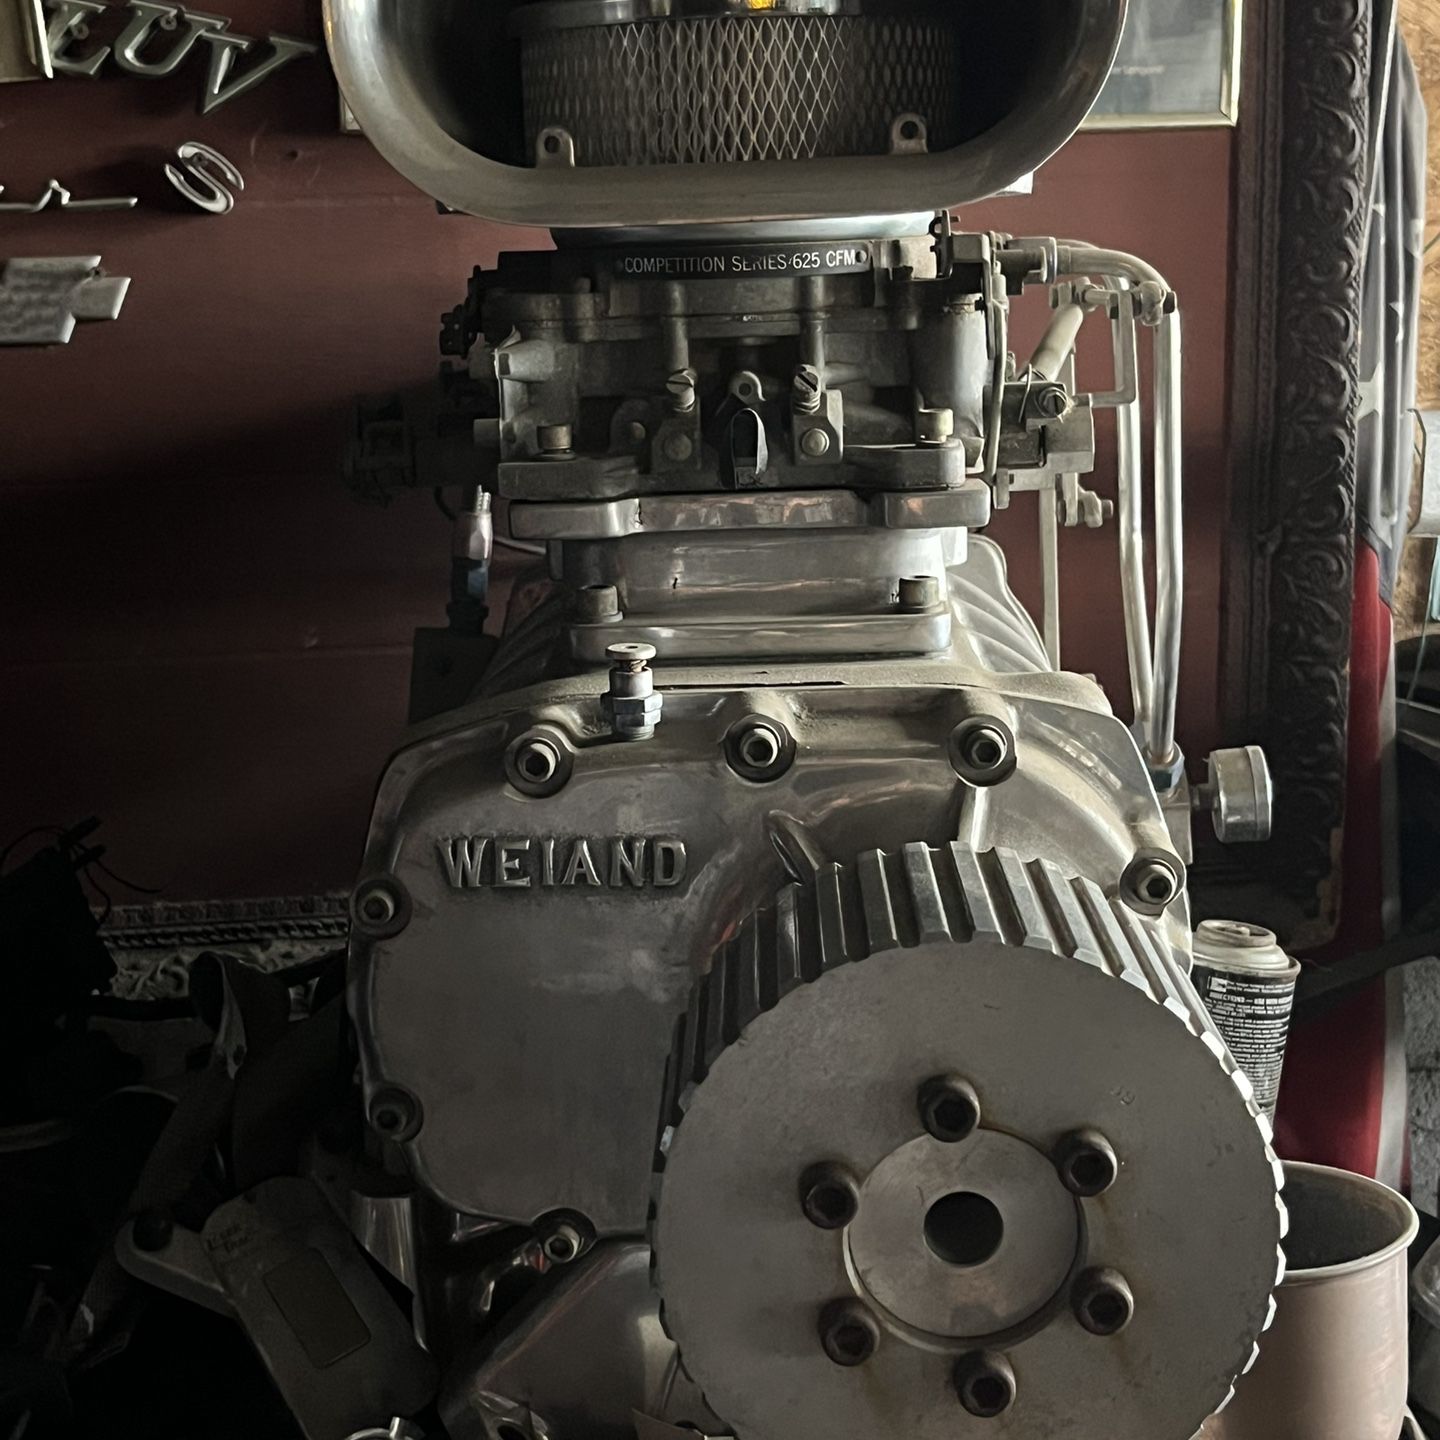 Weiand 671 blower. Carter afb 625 cfm competition carbs. Big block chevy intake manifold 